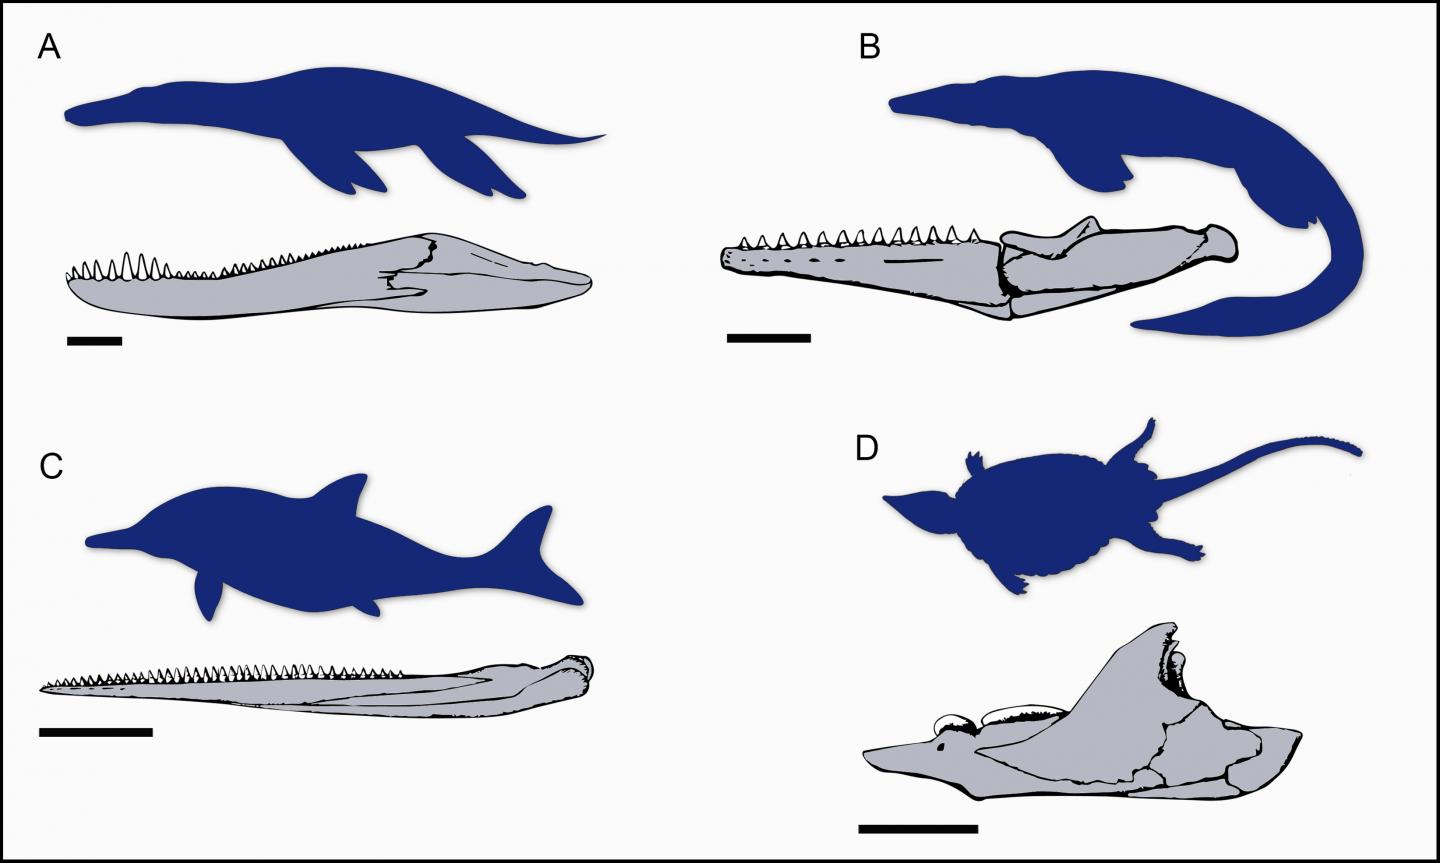 A Sample of Jaws From the Fossil Record of Mesozoic Marine Reptiles